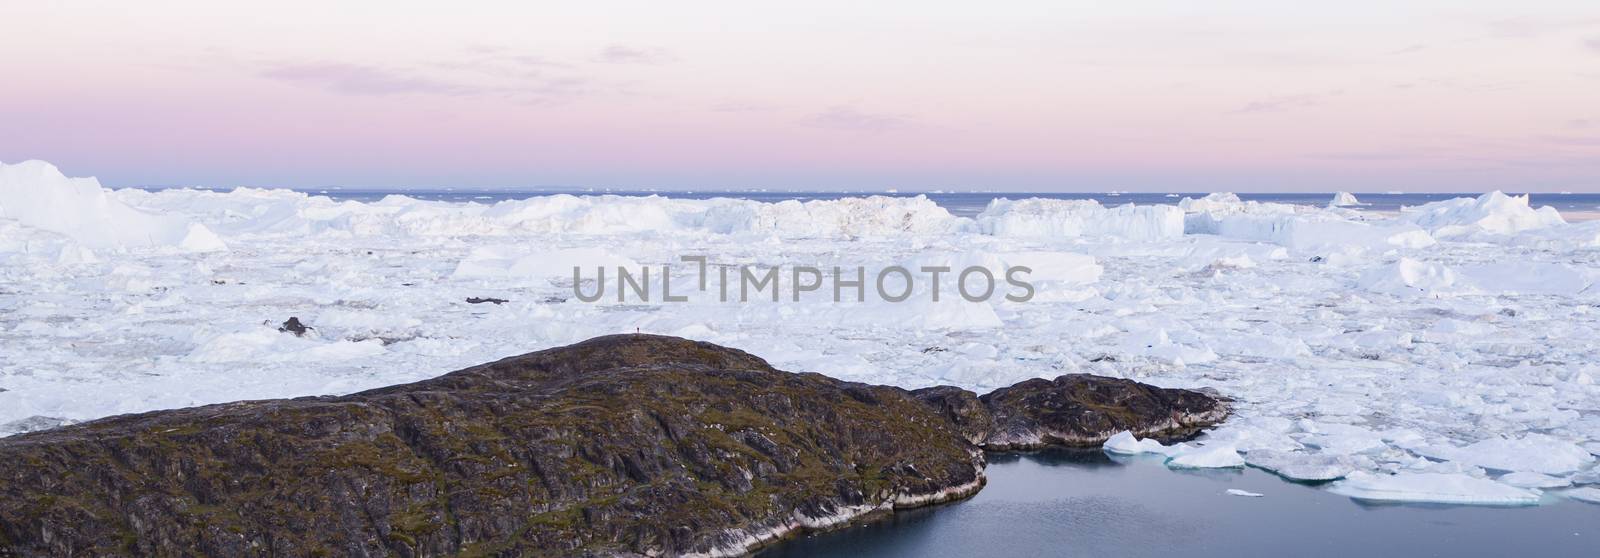 Greenland landscape nature with icebergs and ice in Greenland icefjord. Aerial drone panoramic banner photo of Ilulissat Icefjord with icebergs from Jakobshavn Glacier. Person in image for scale by Maridav